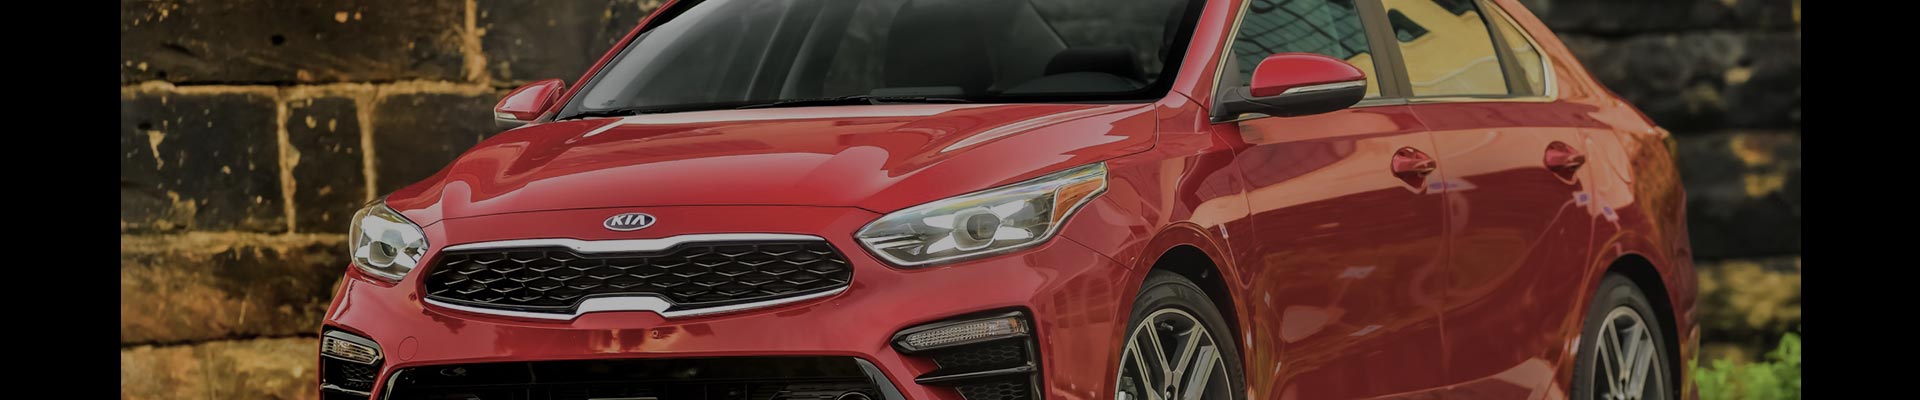 Shop Replacement and OEM 2018 Kia Forte Parts with Discounted Price on the Net